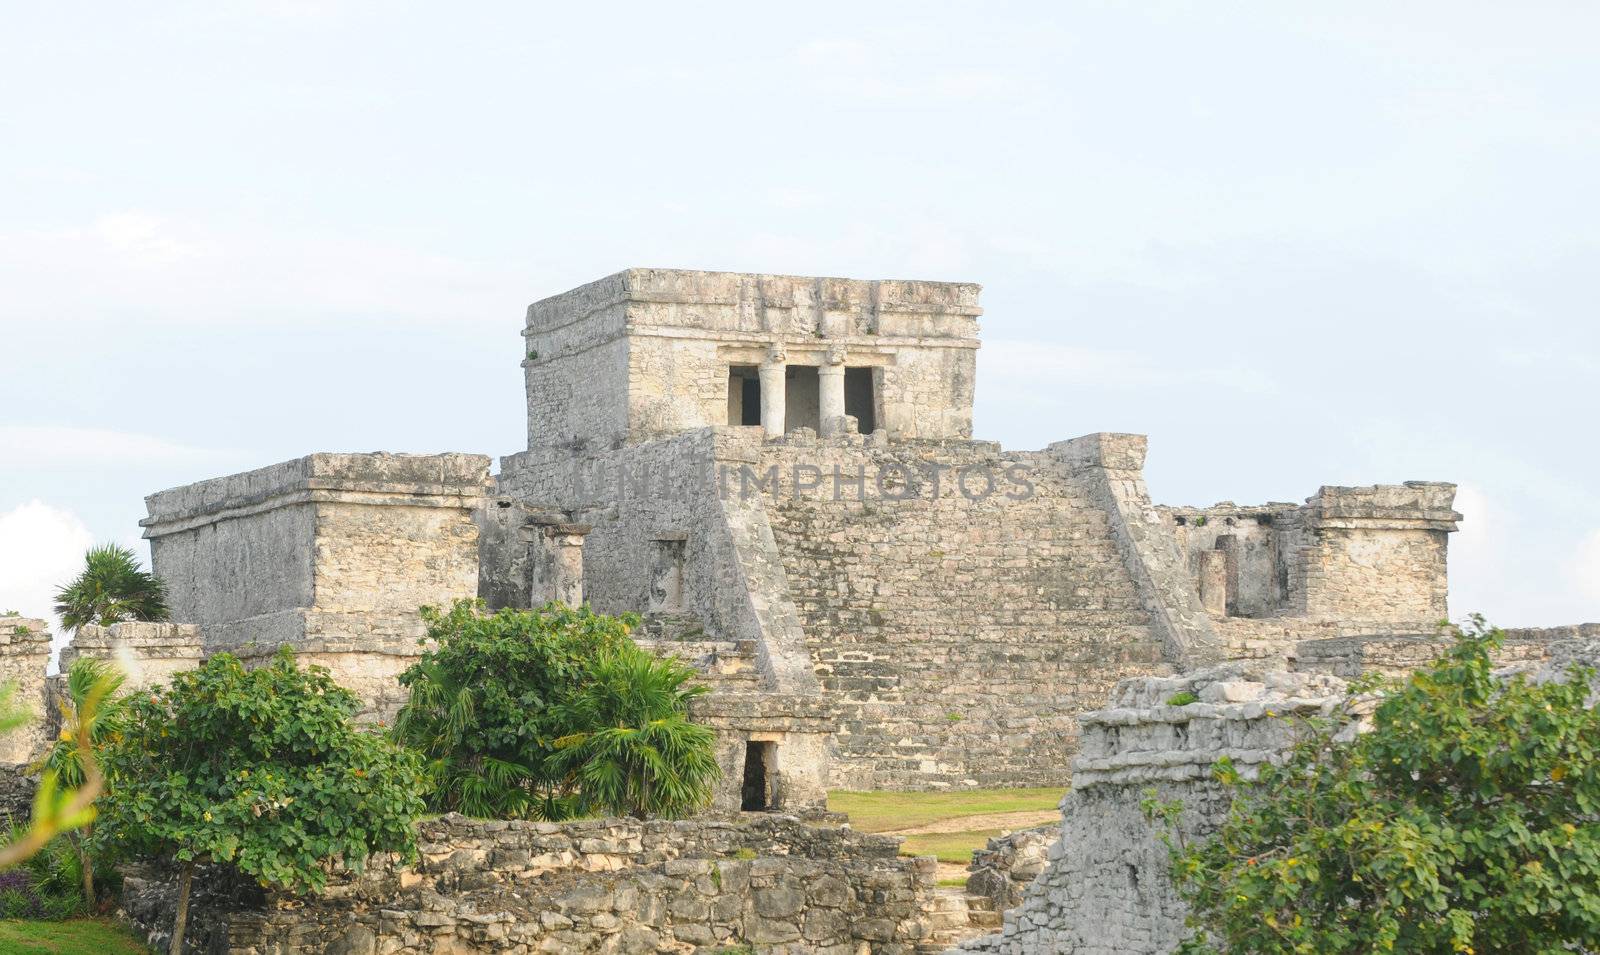 A Mayan Temple Used for Ceremonial purposes in Tulum, Mexico